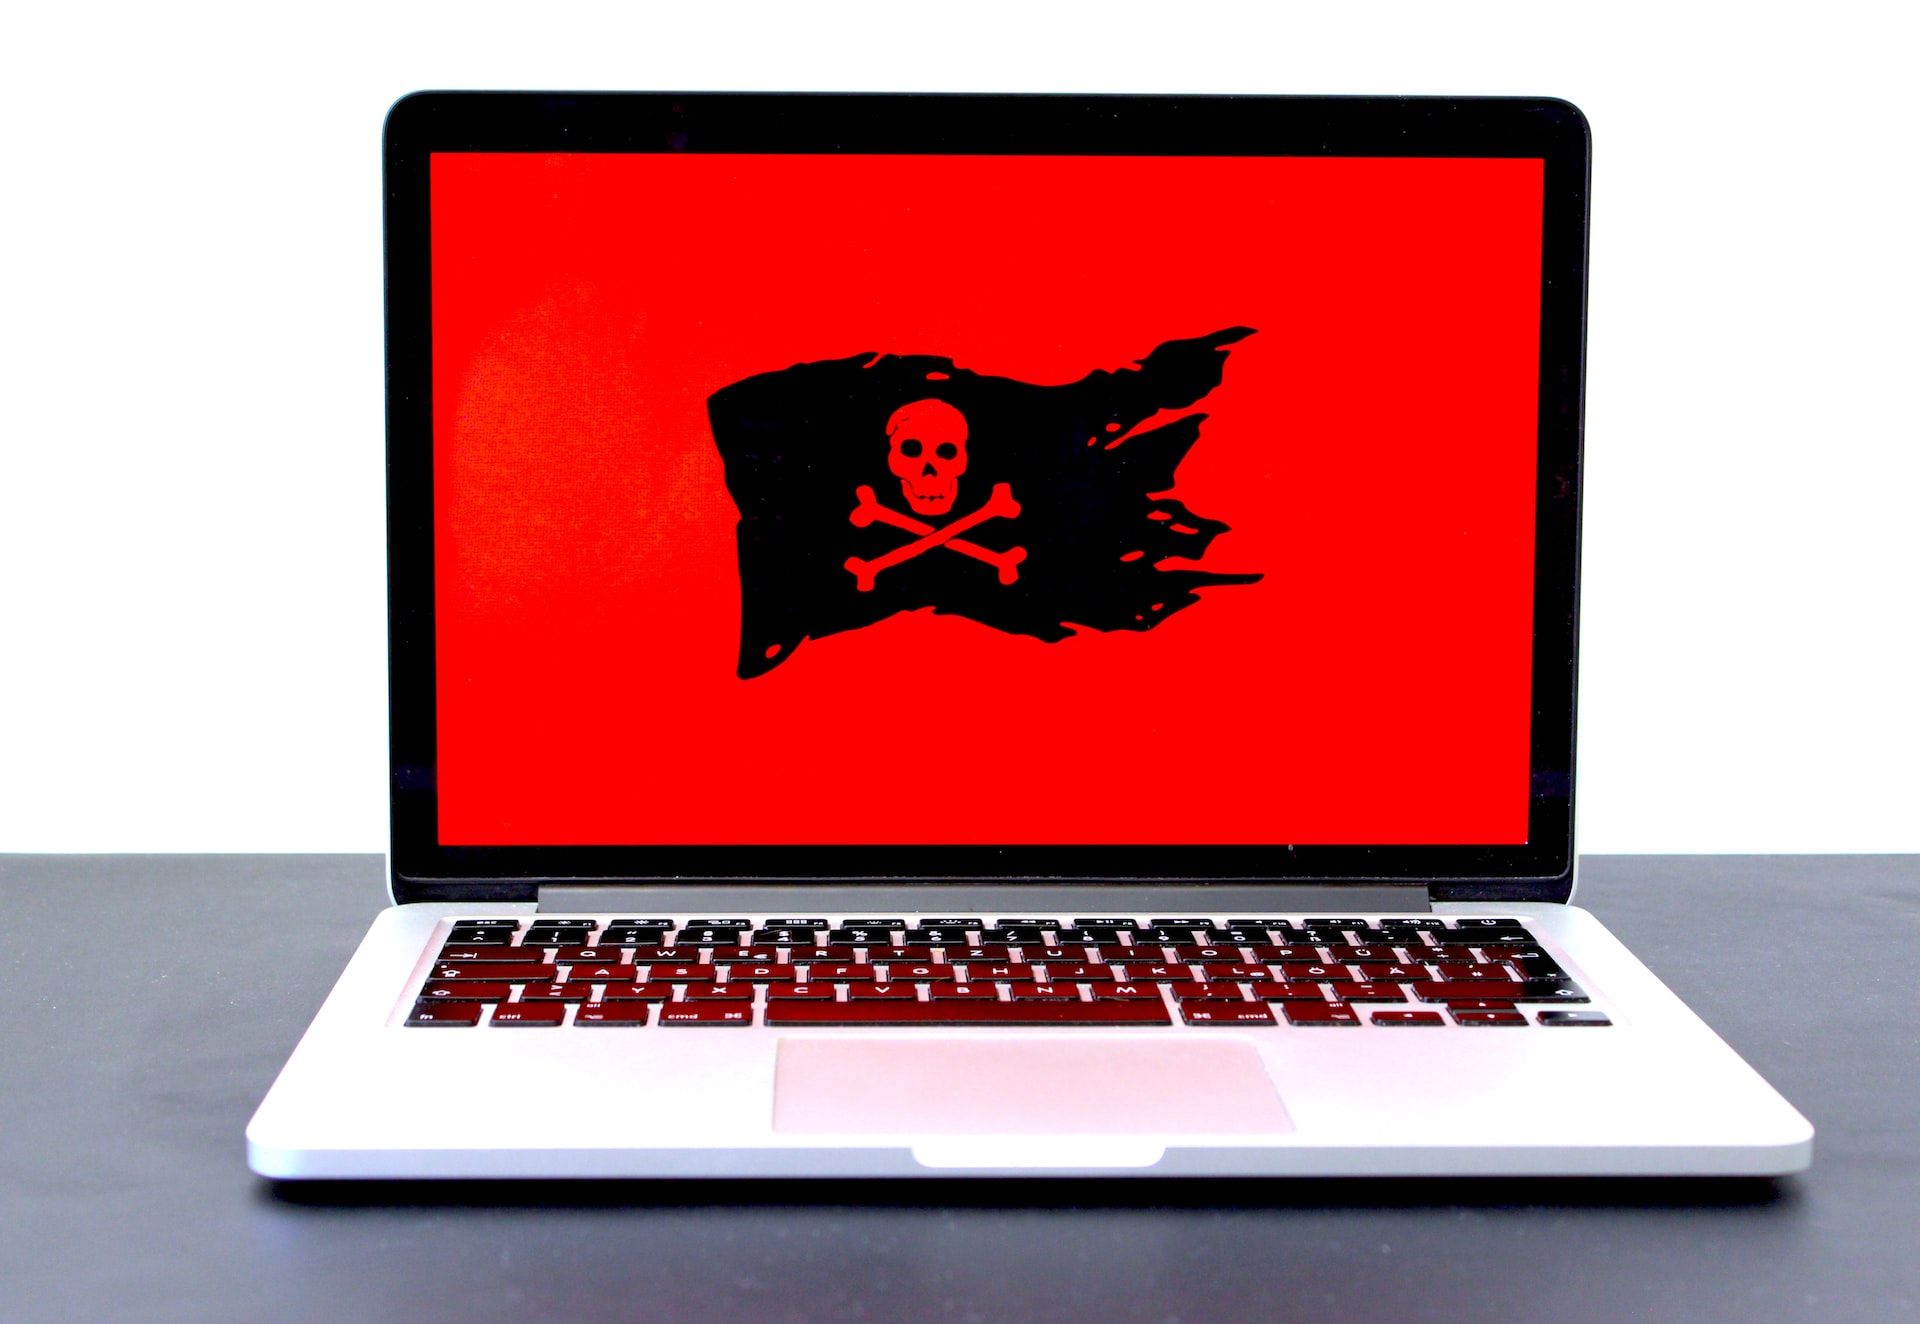 Red screen on a laptop indicating malware infection